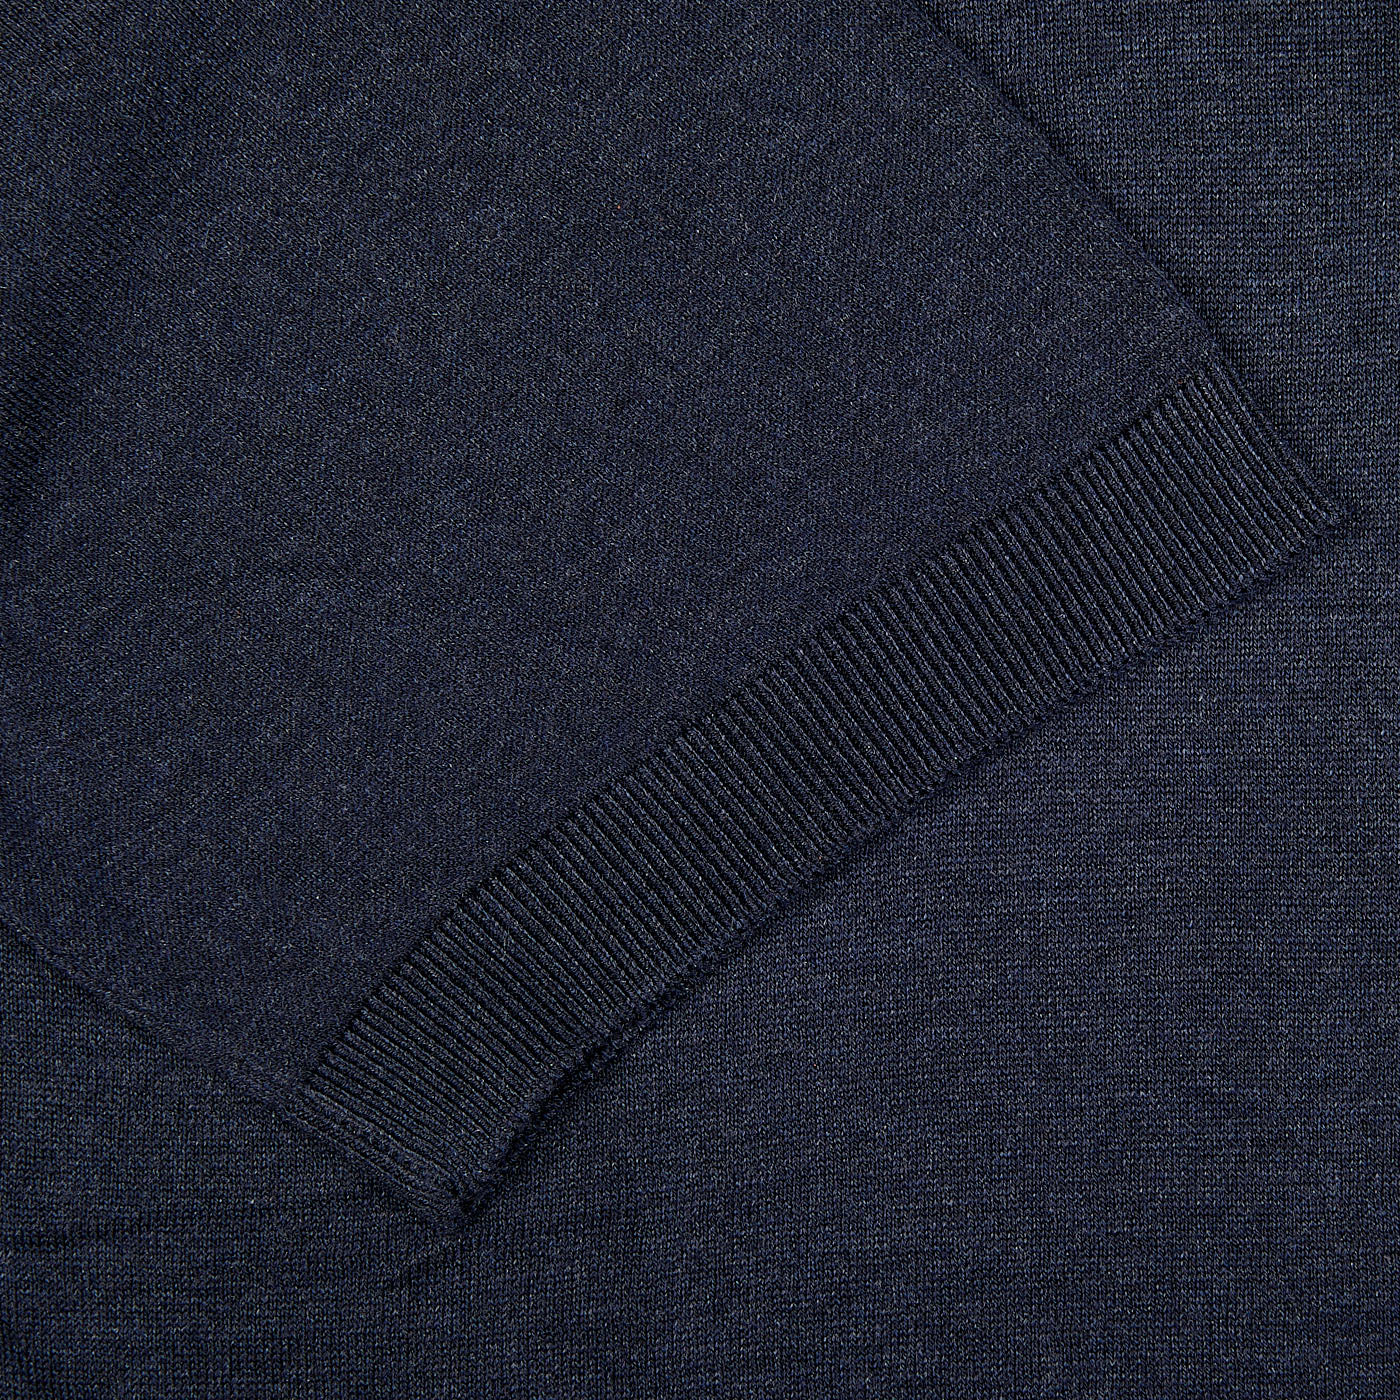 A close up of a Gran Sasso Navy Blue Knitted Silk Polo Shirt.